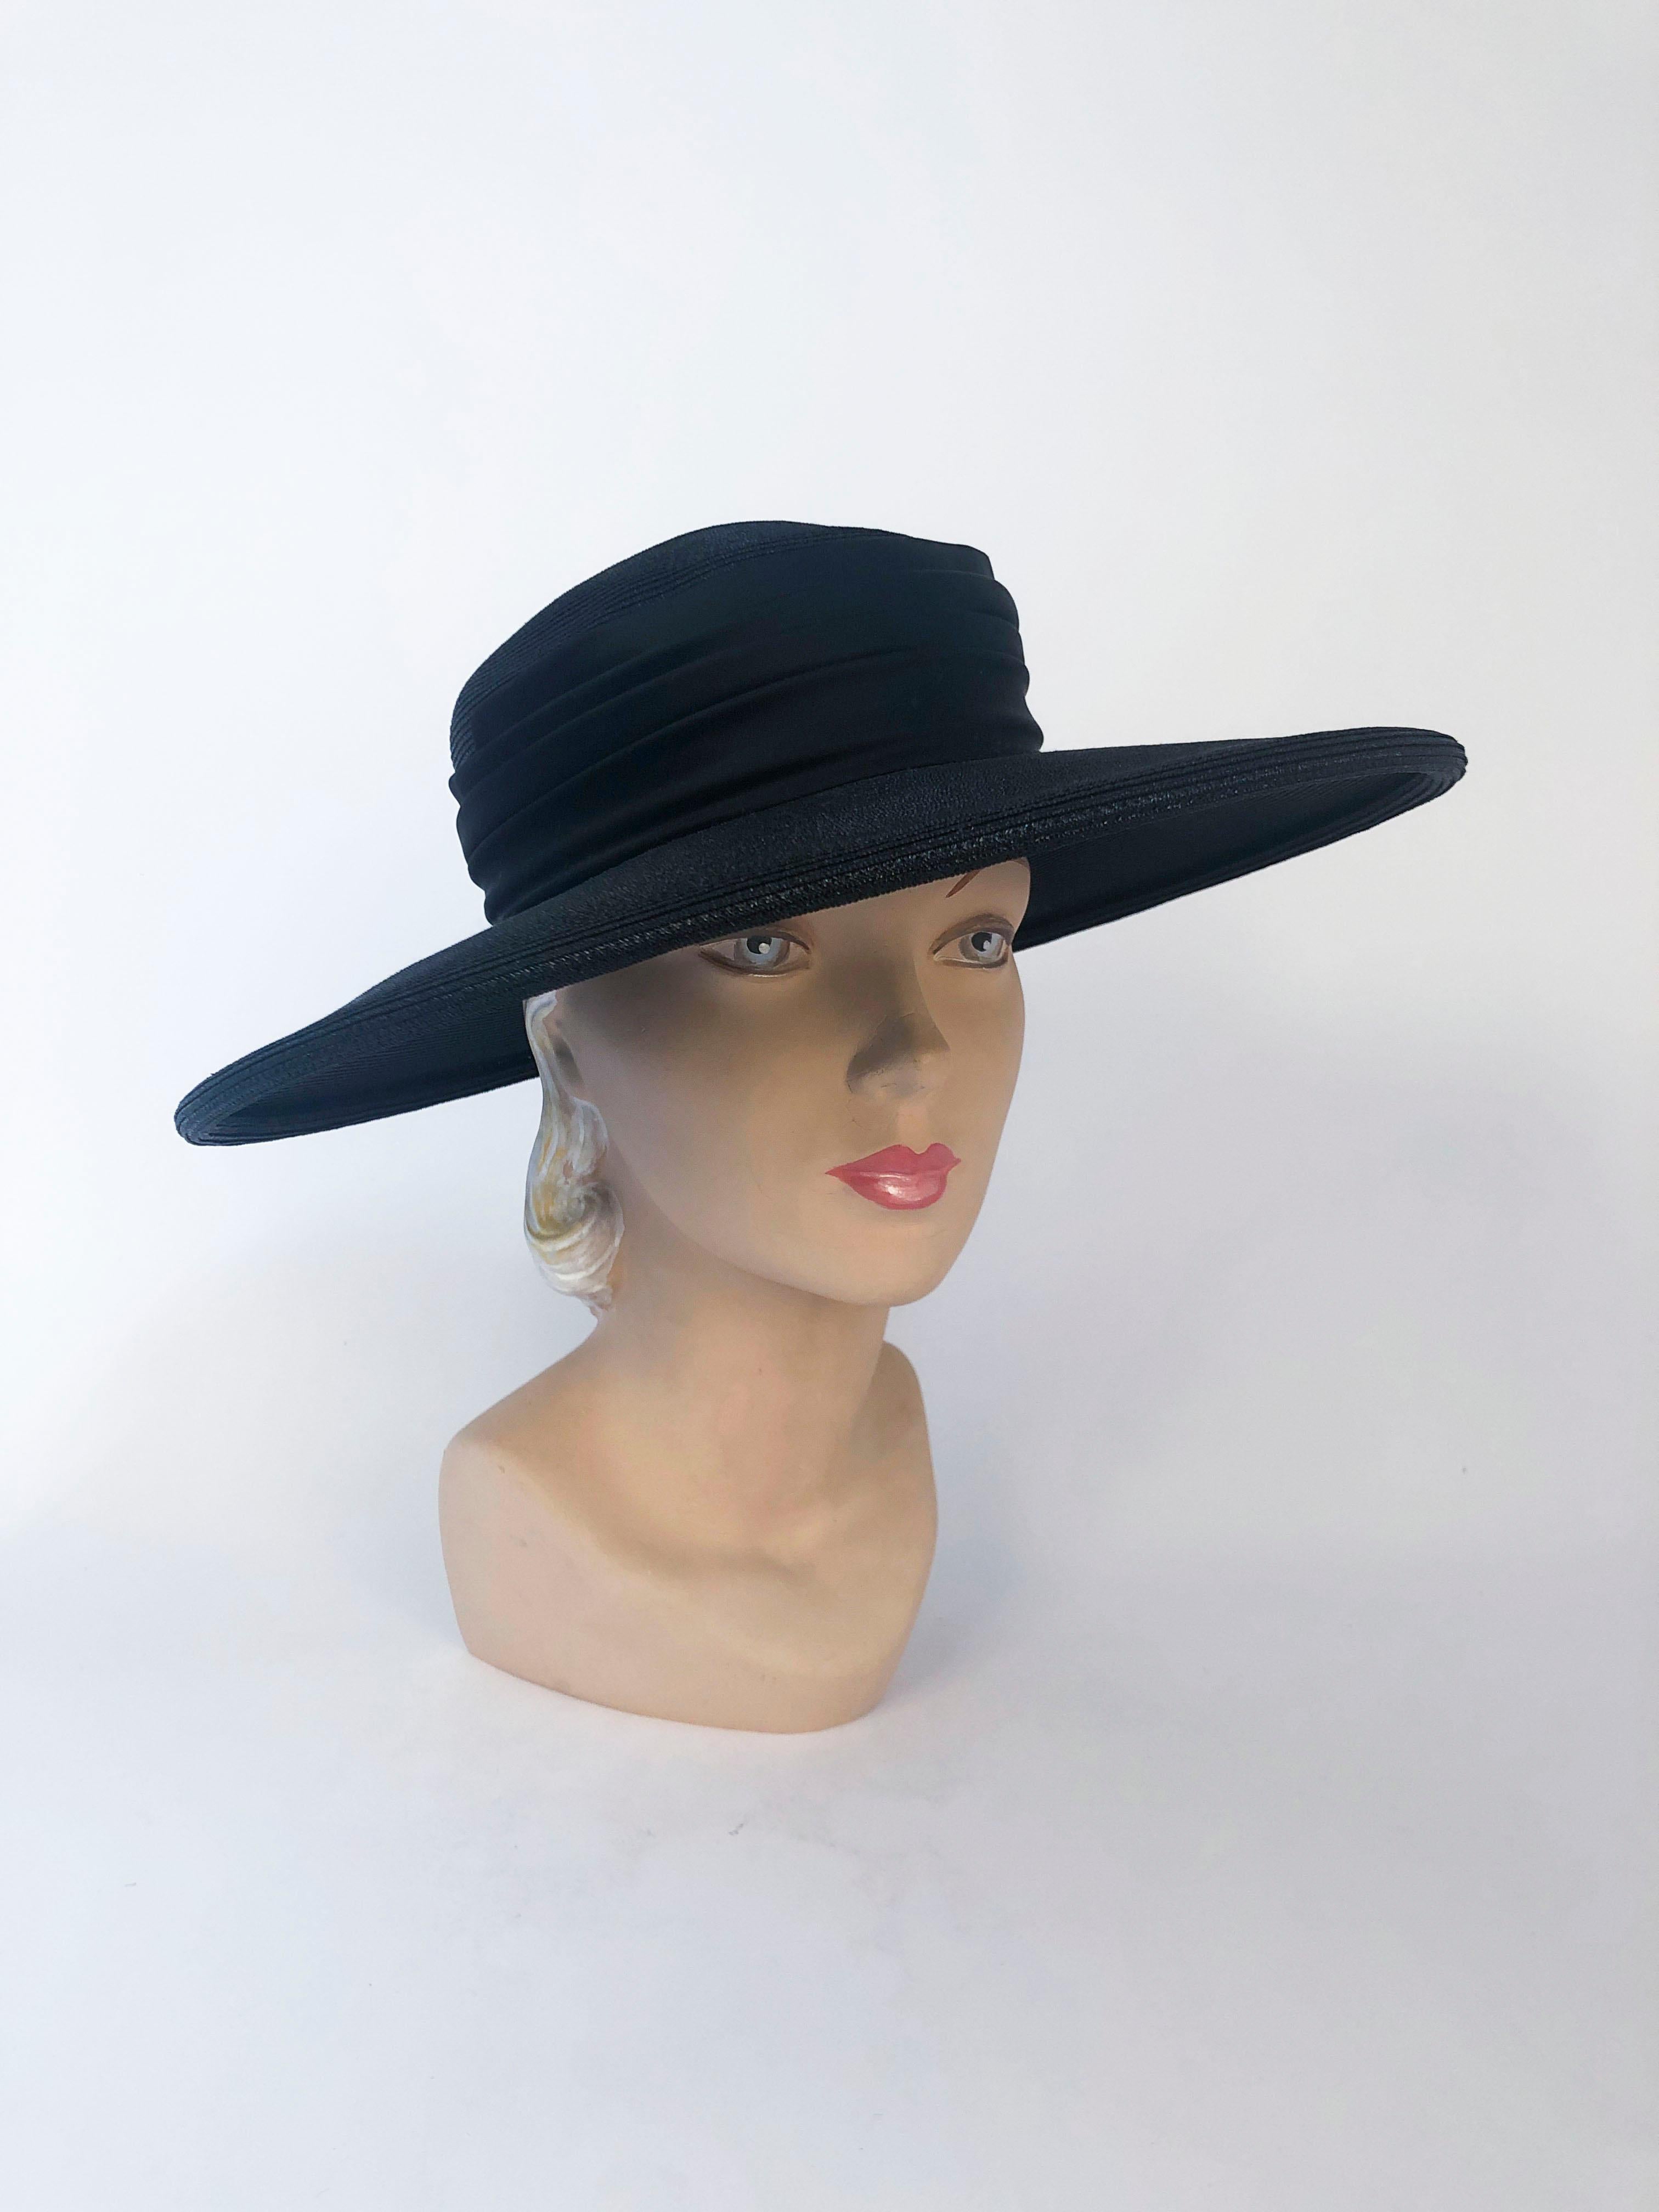 1960's Black coated Straw Hat with Wide Tiered Satin Band and oversized bow on the back of the wide brim. The satin band has tiered effect that meets at the back to created the base of the bow.